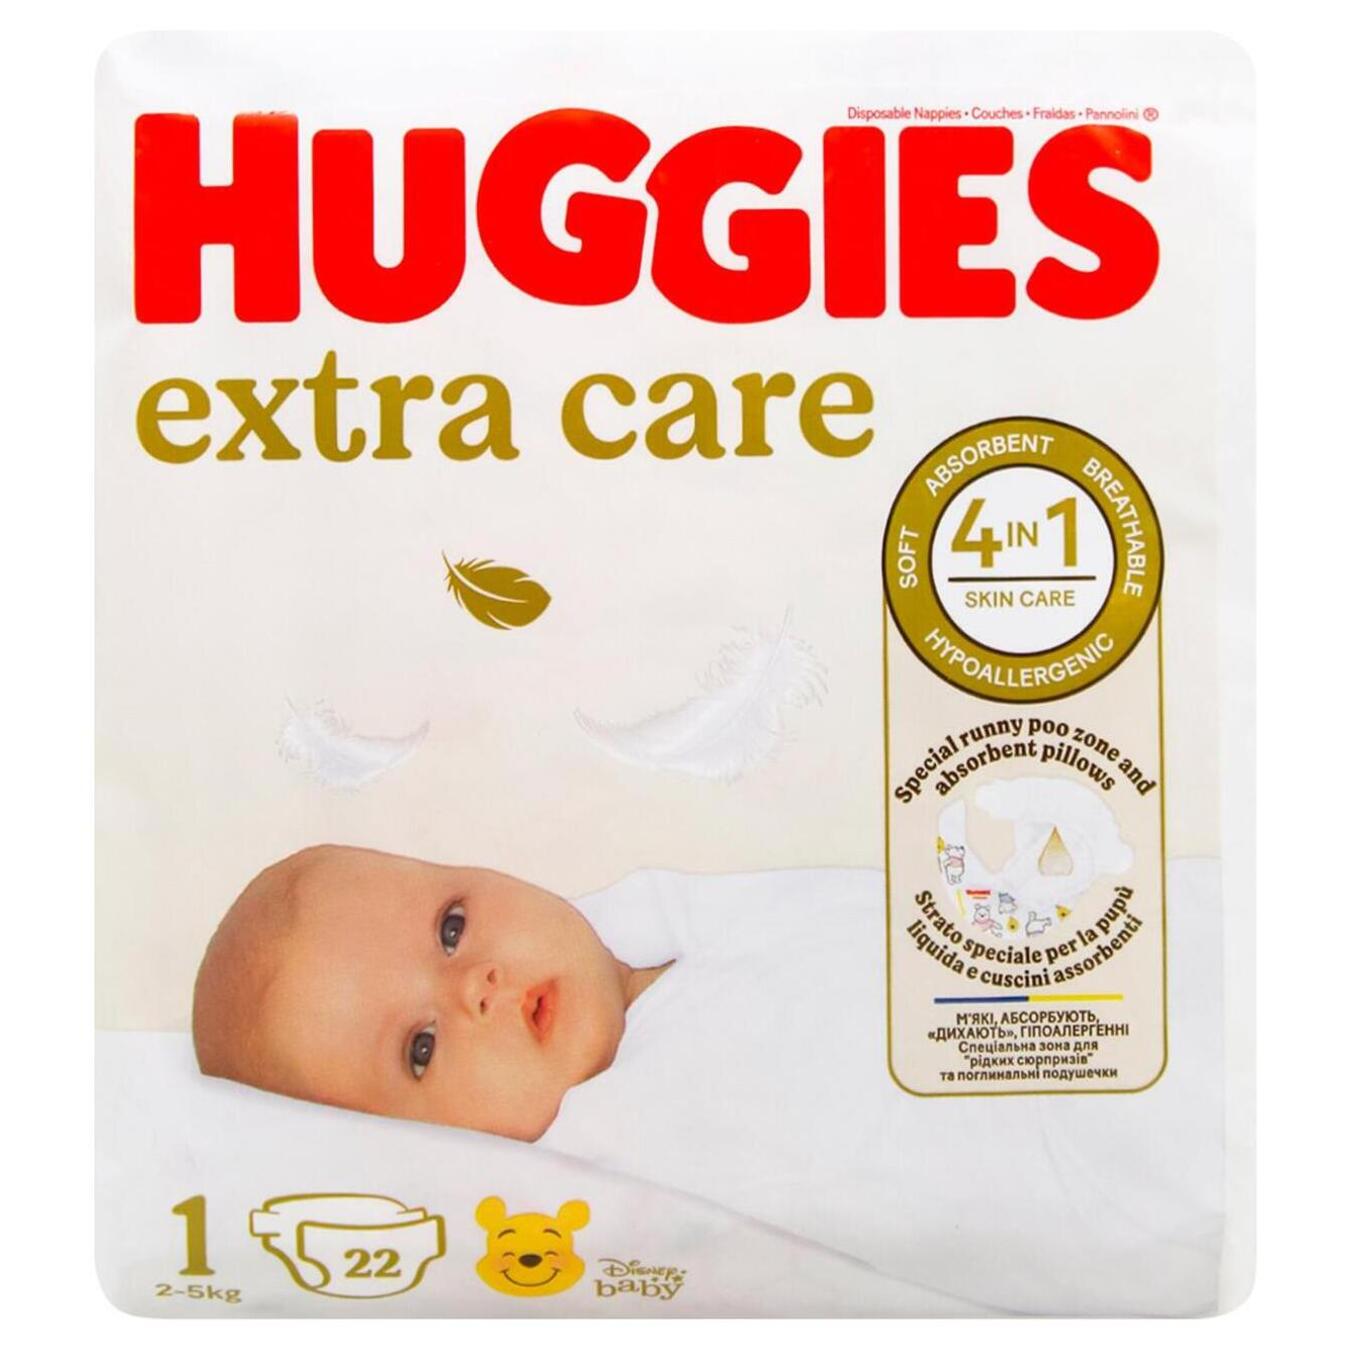 Baby diapers Huggies Extra care (1) 2-5 kg 22 pcs